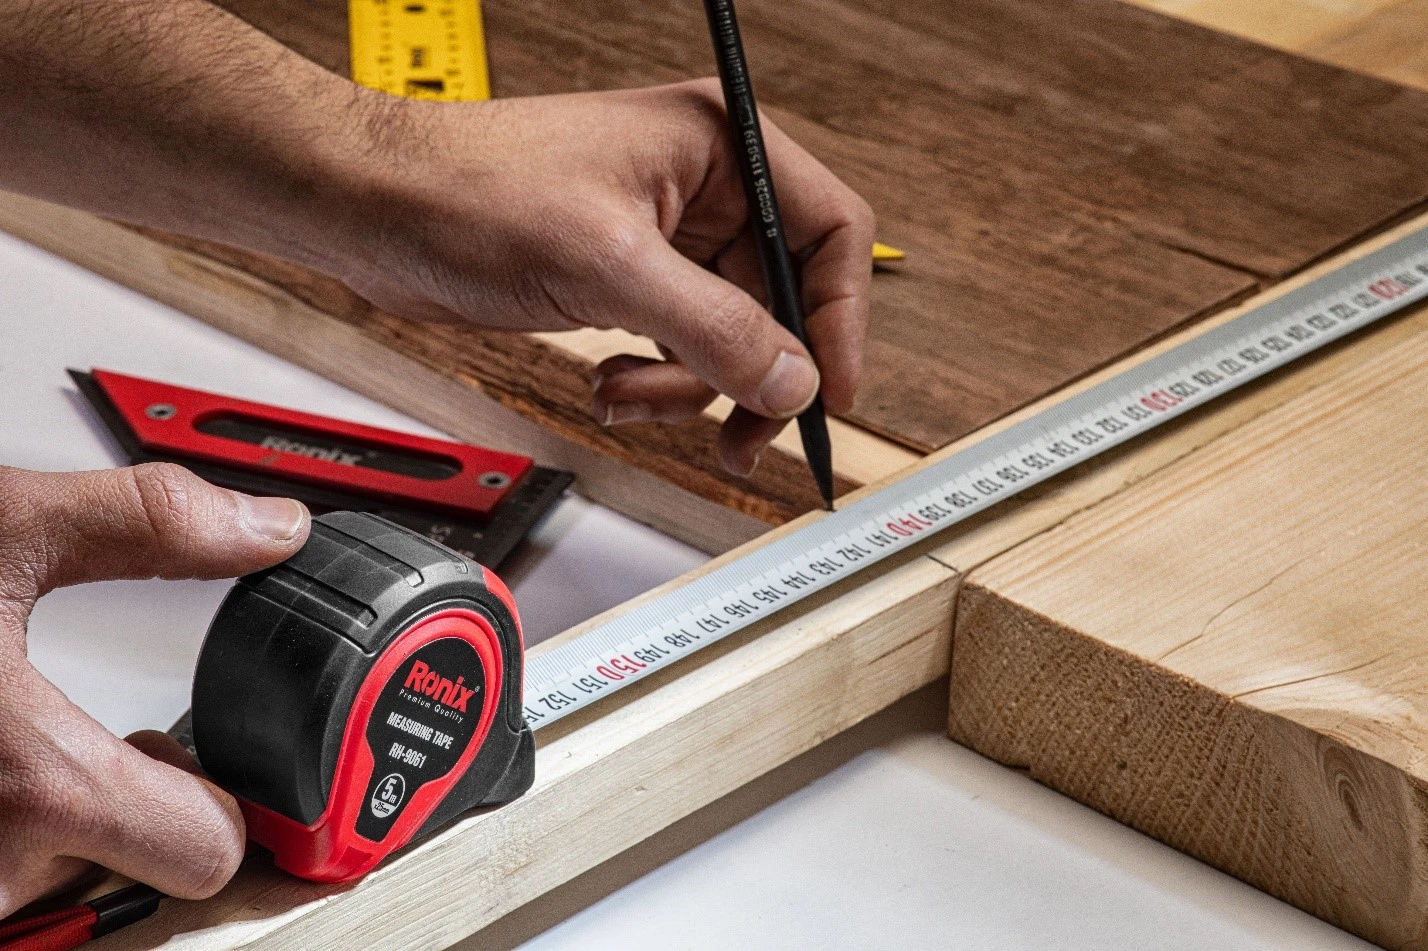 Ronix tape measure as one of the best measuring tools for woodworking